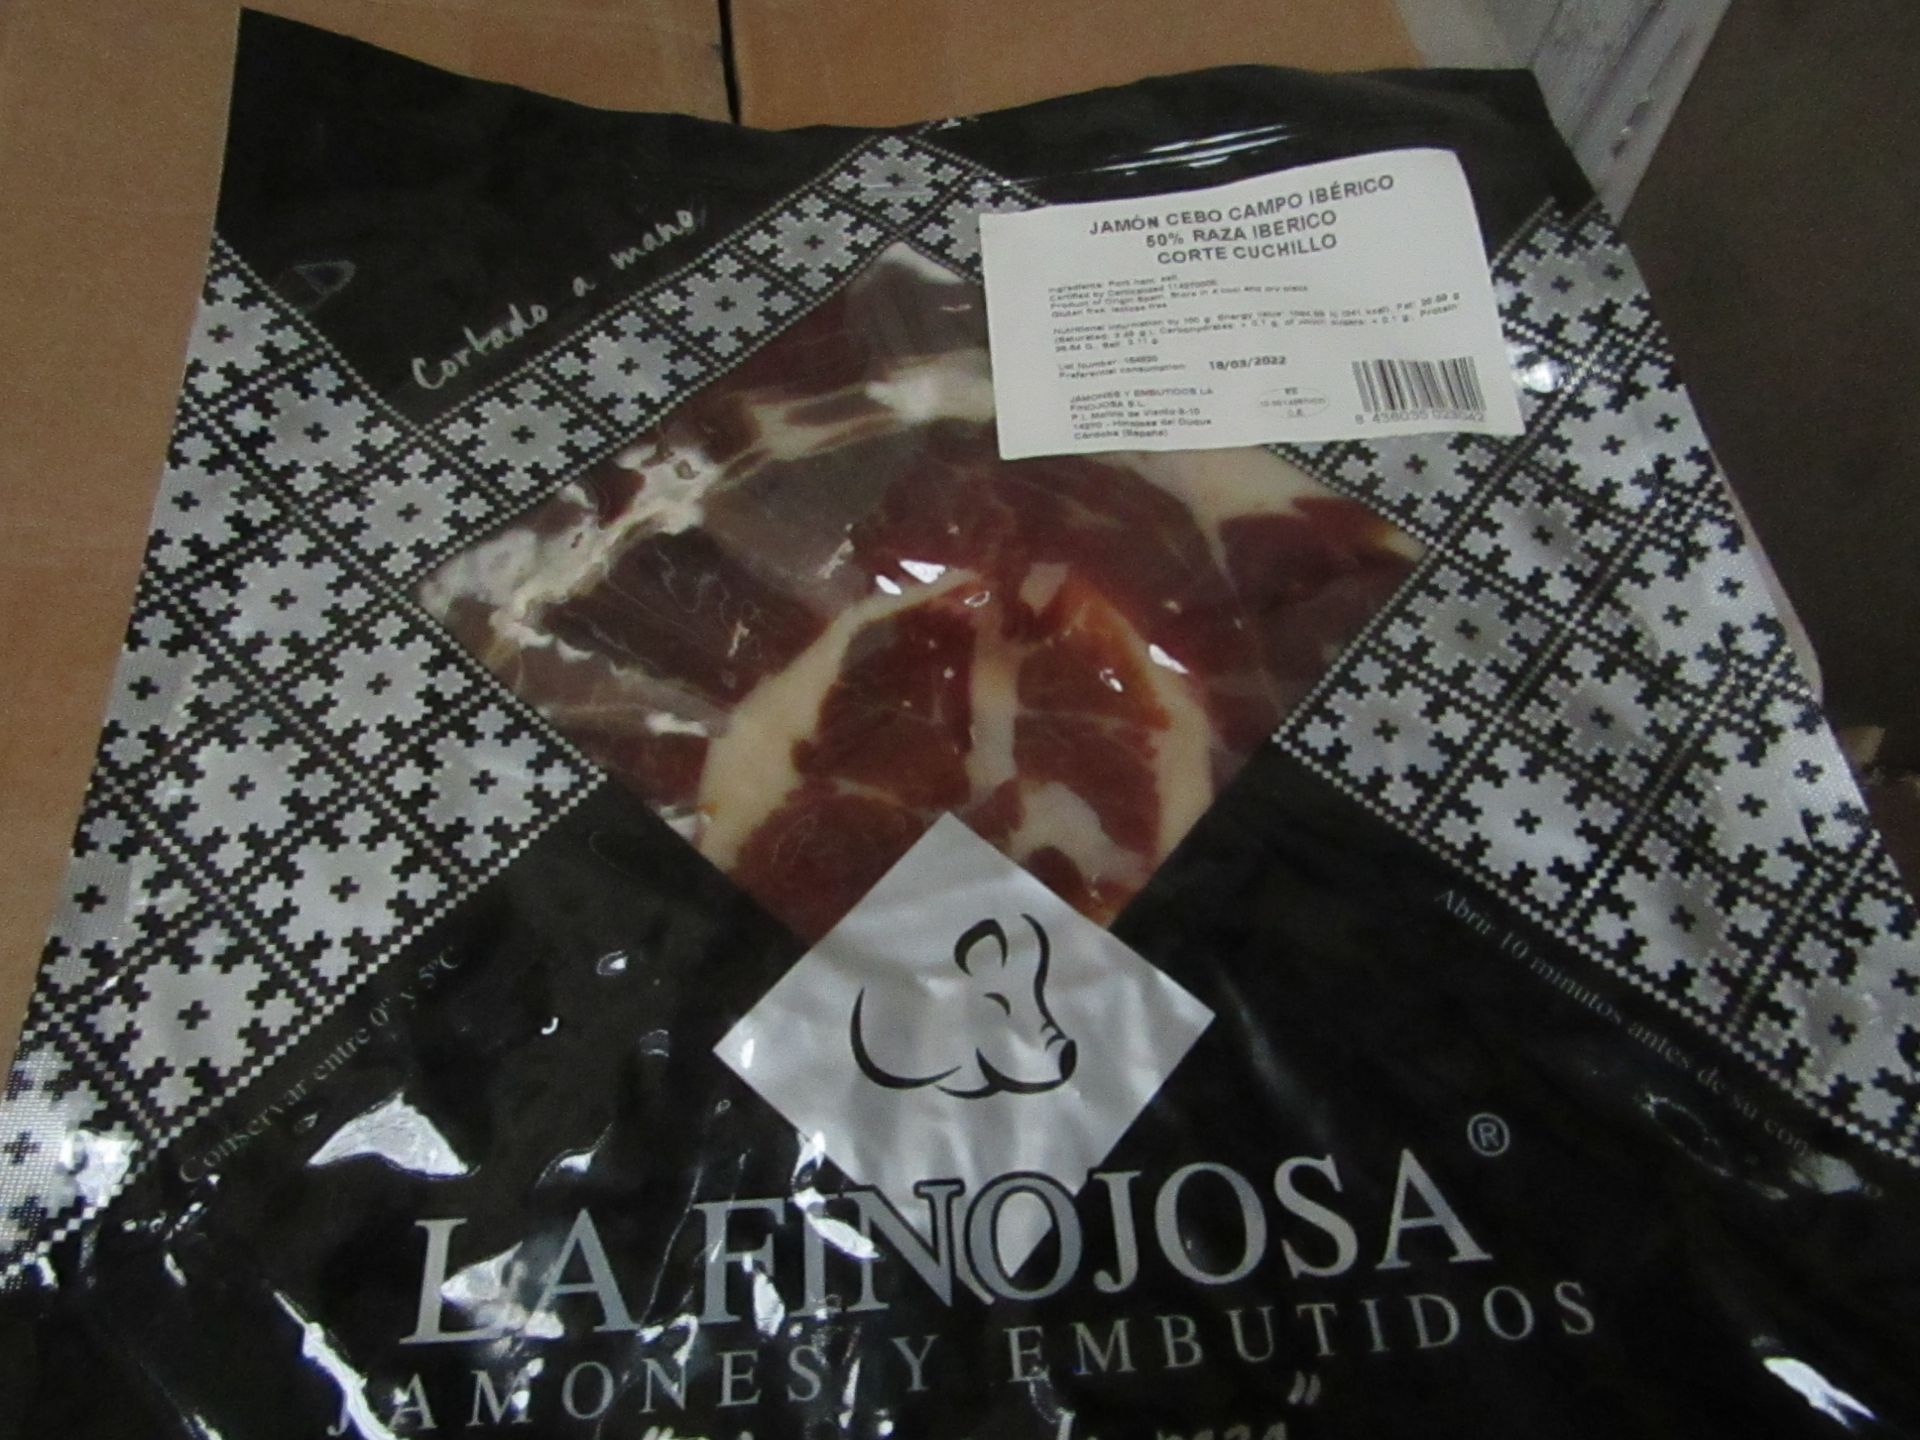 10 x La Finojosa 100g packets Sliced Iberian cured ham in slices. BB 18.3.22 RRP £16.25 per packet